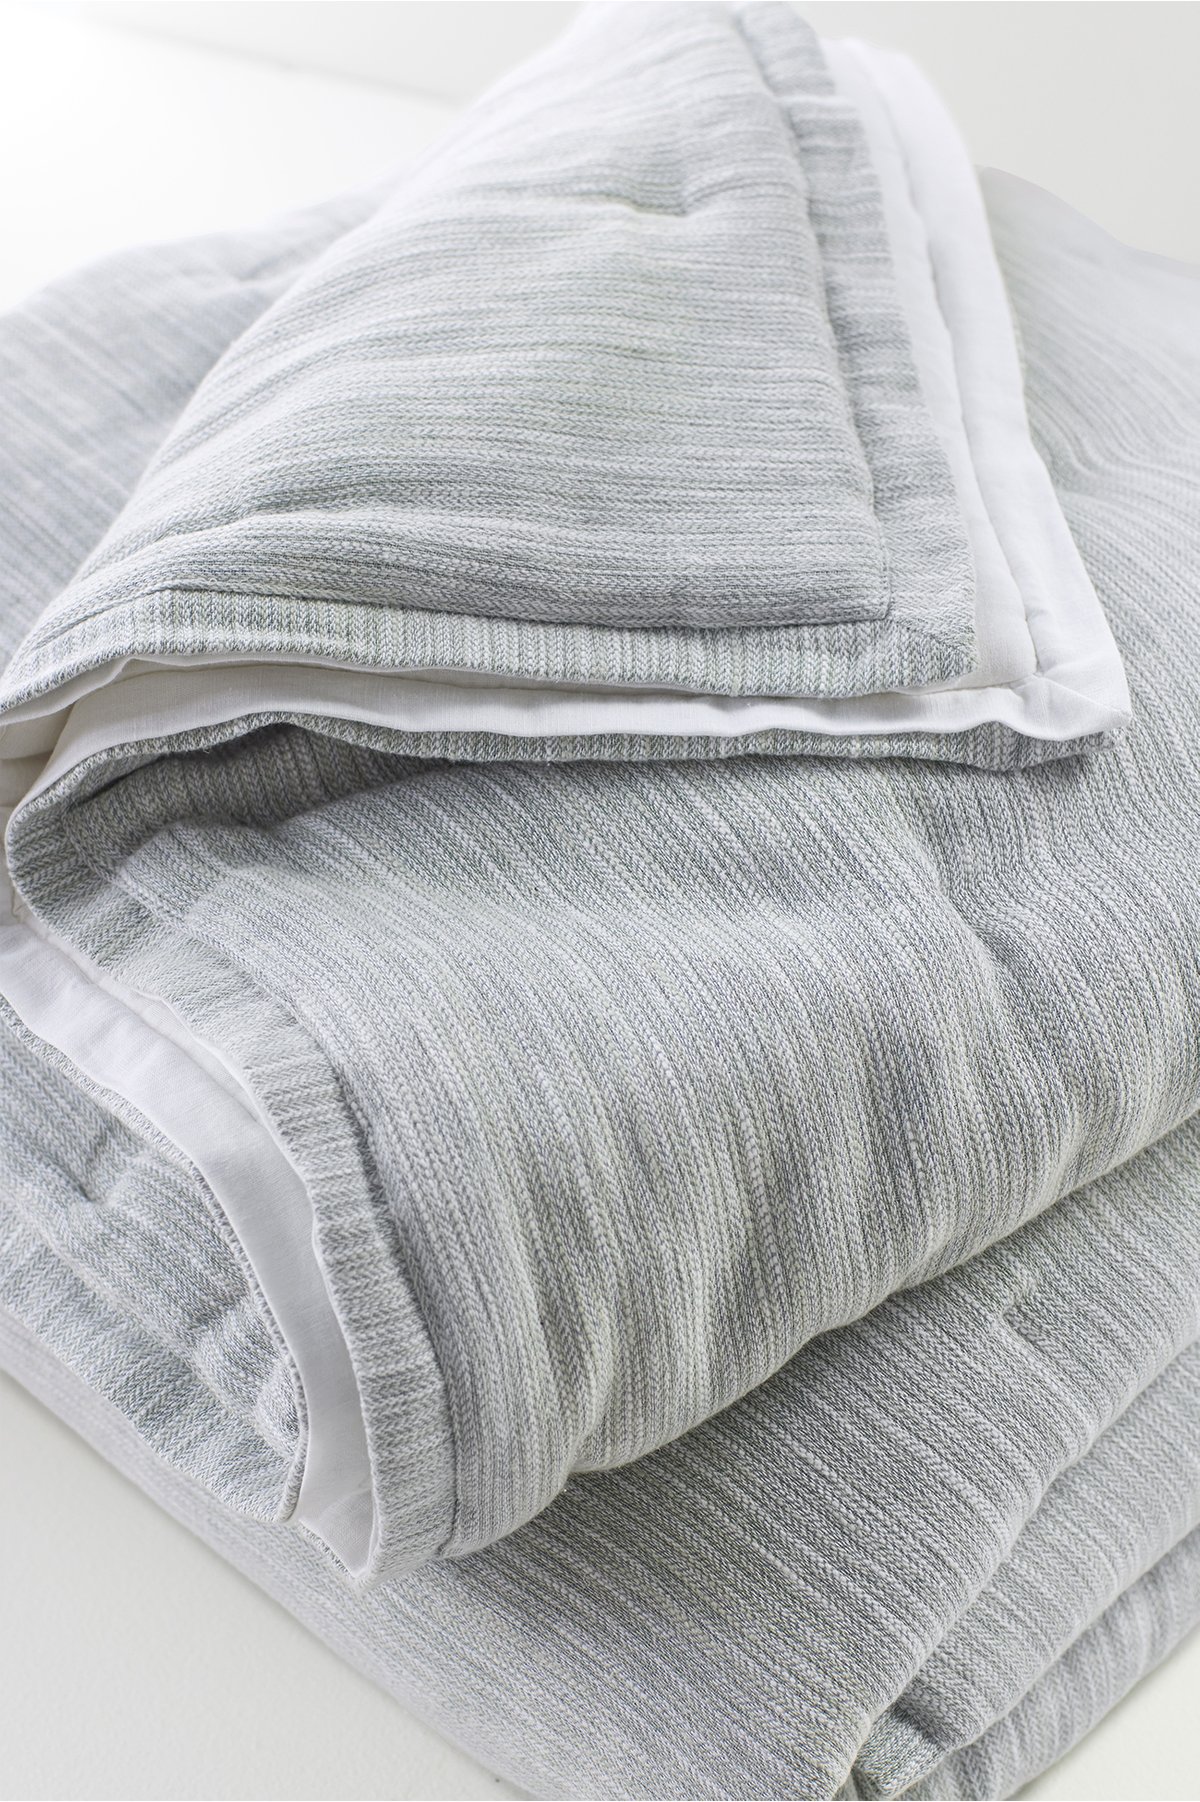 Evie Textured Comforter by Soft Surroundings, in Silver Sea size King